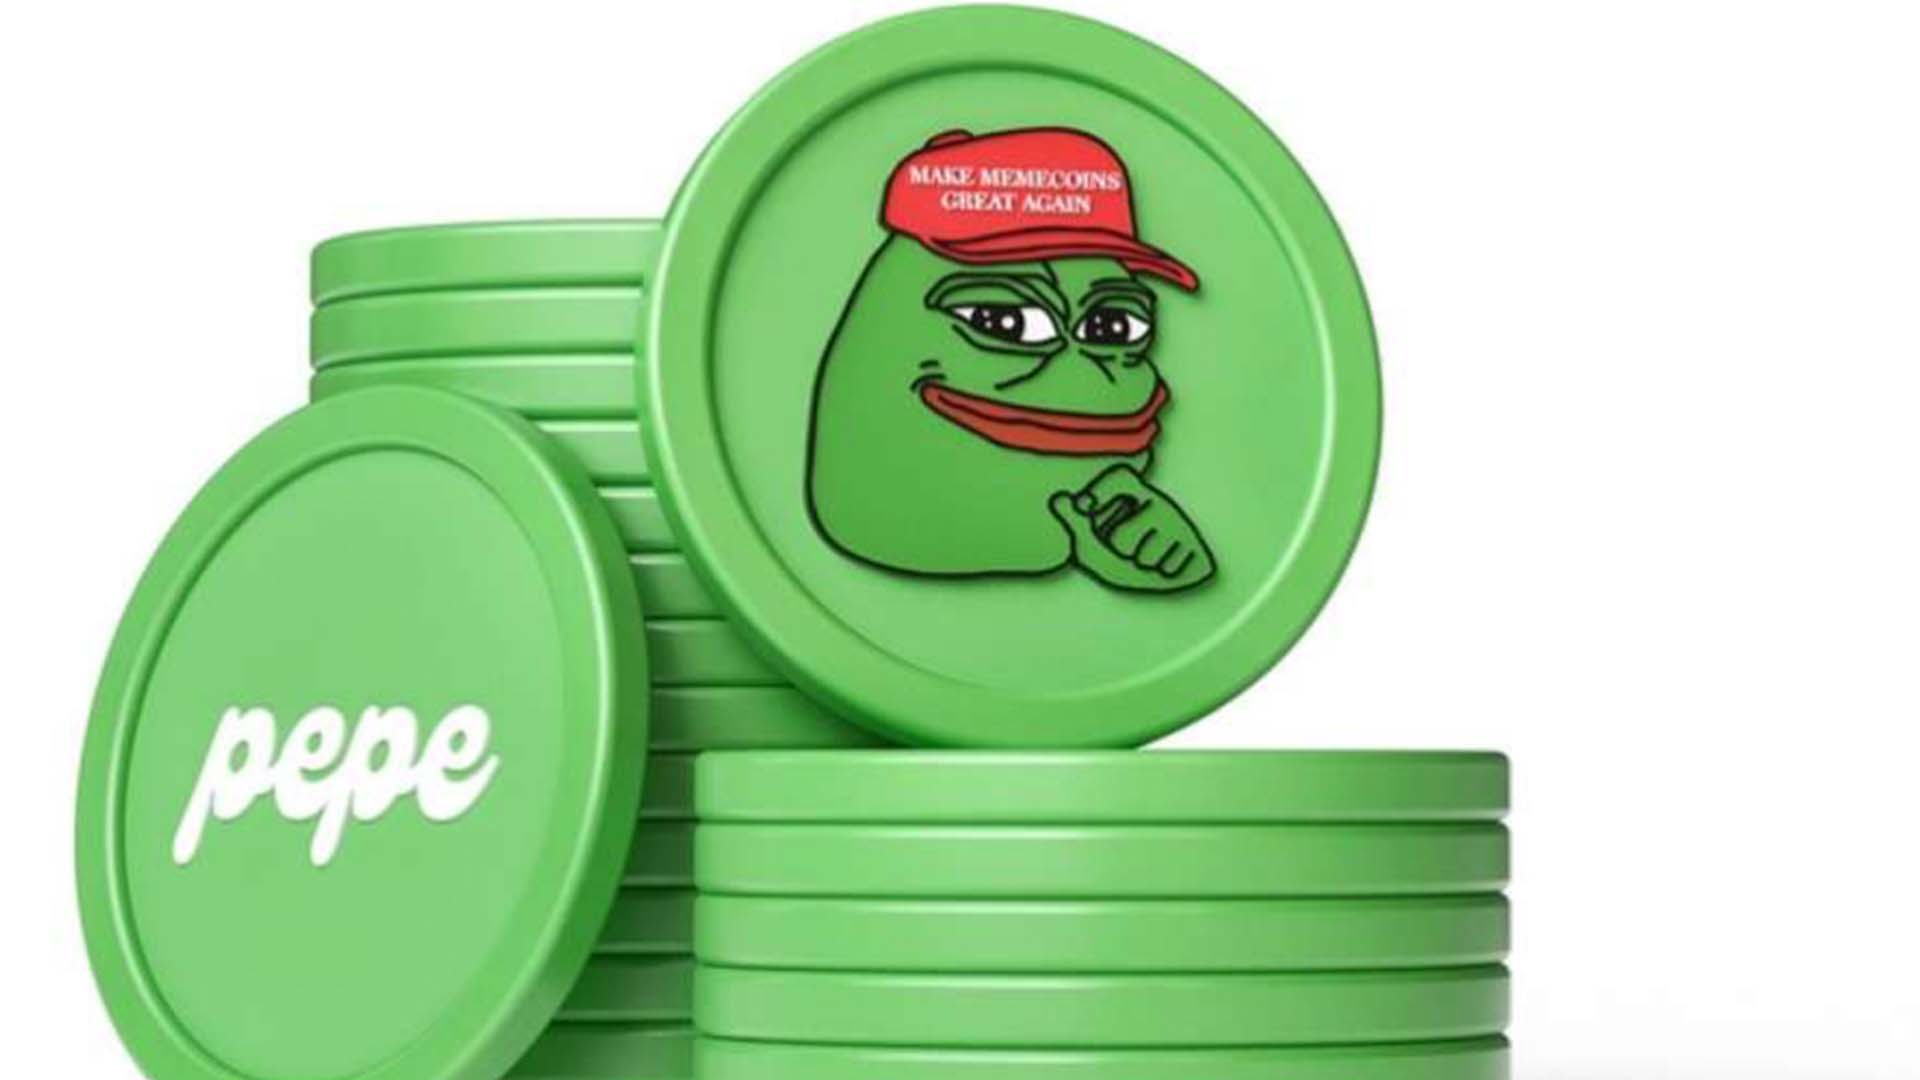 Korean Meme Coin UwU Surges as Top Crypto Gainer on DEXTools – Could It Become the Next Pepe?